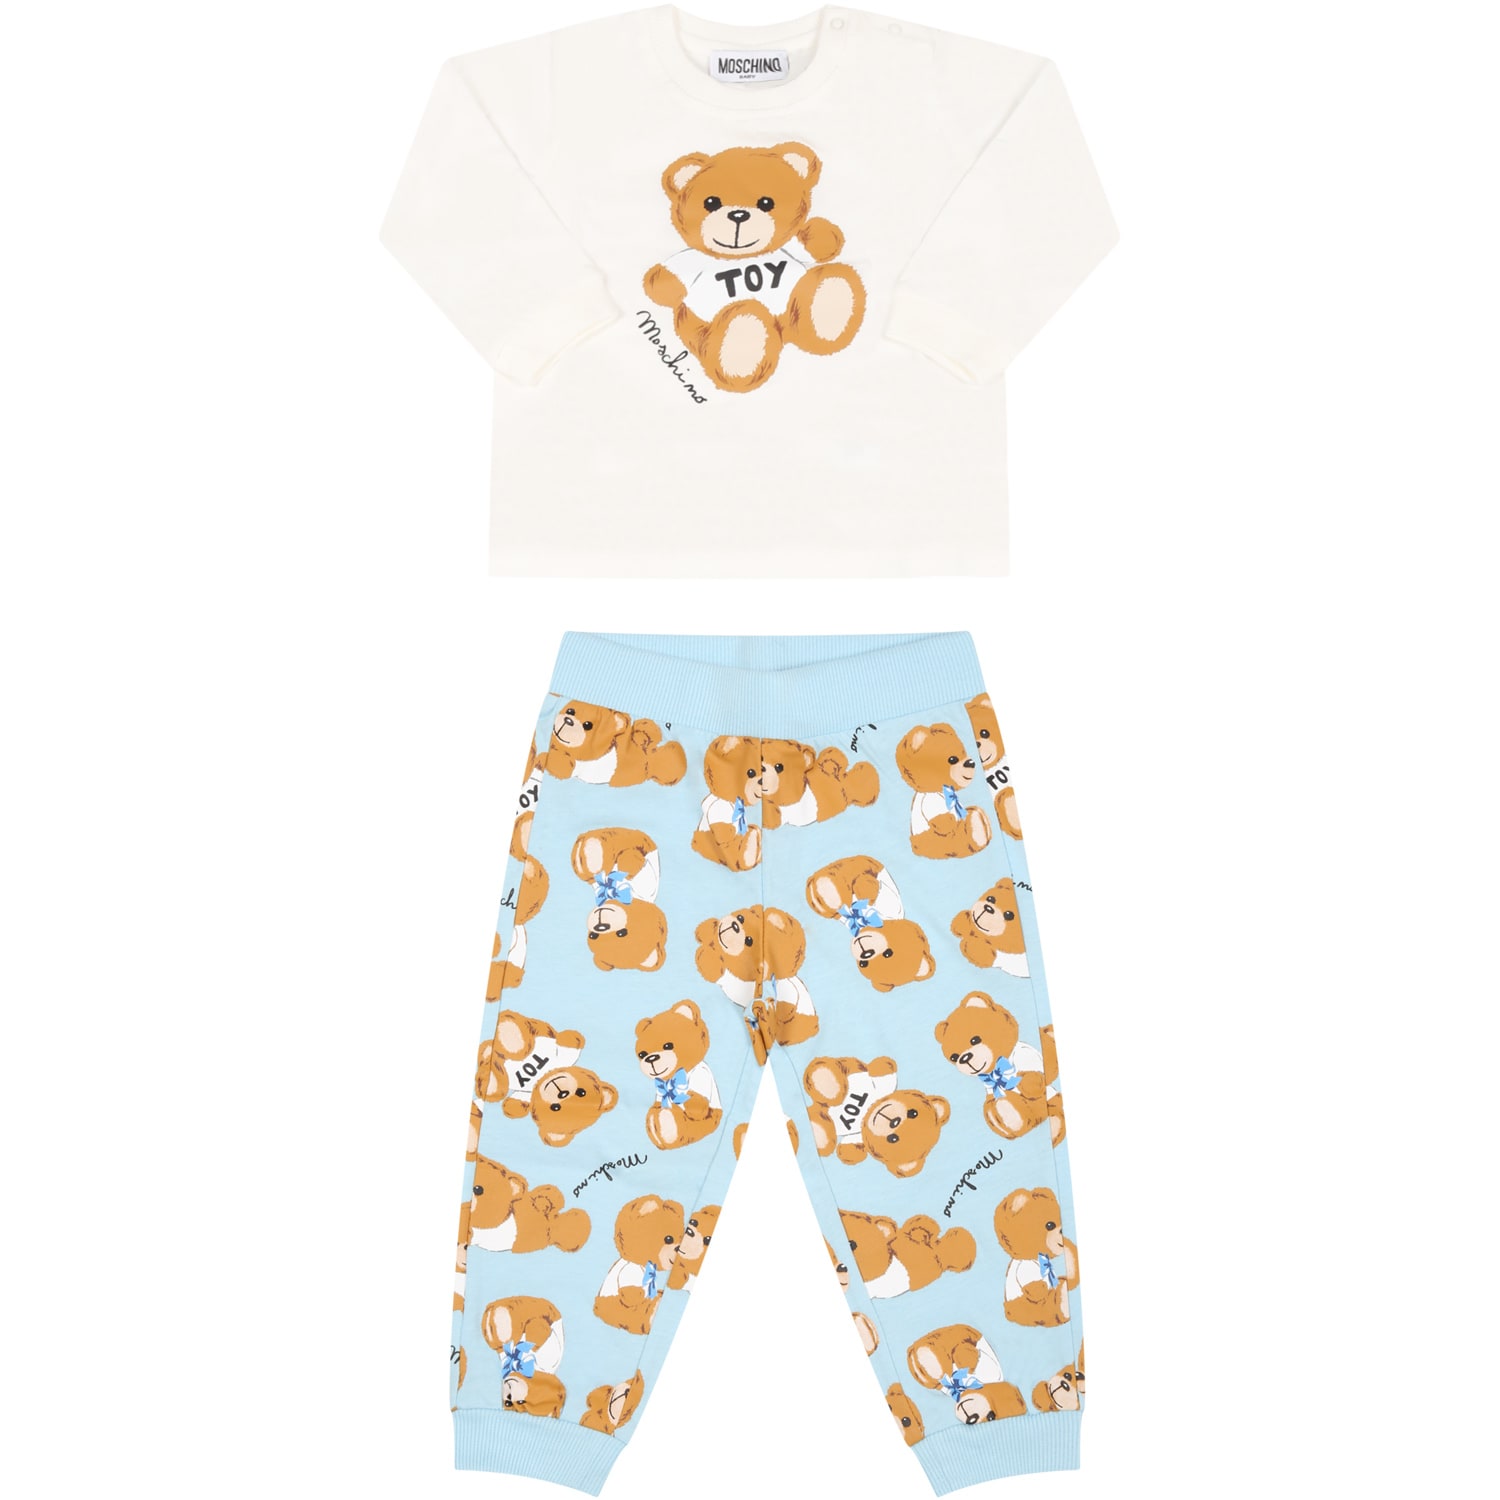 Moschino Multicolor Set For Baby Boy With Teddy Bears